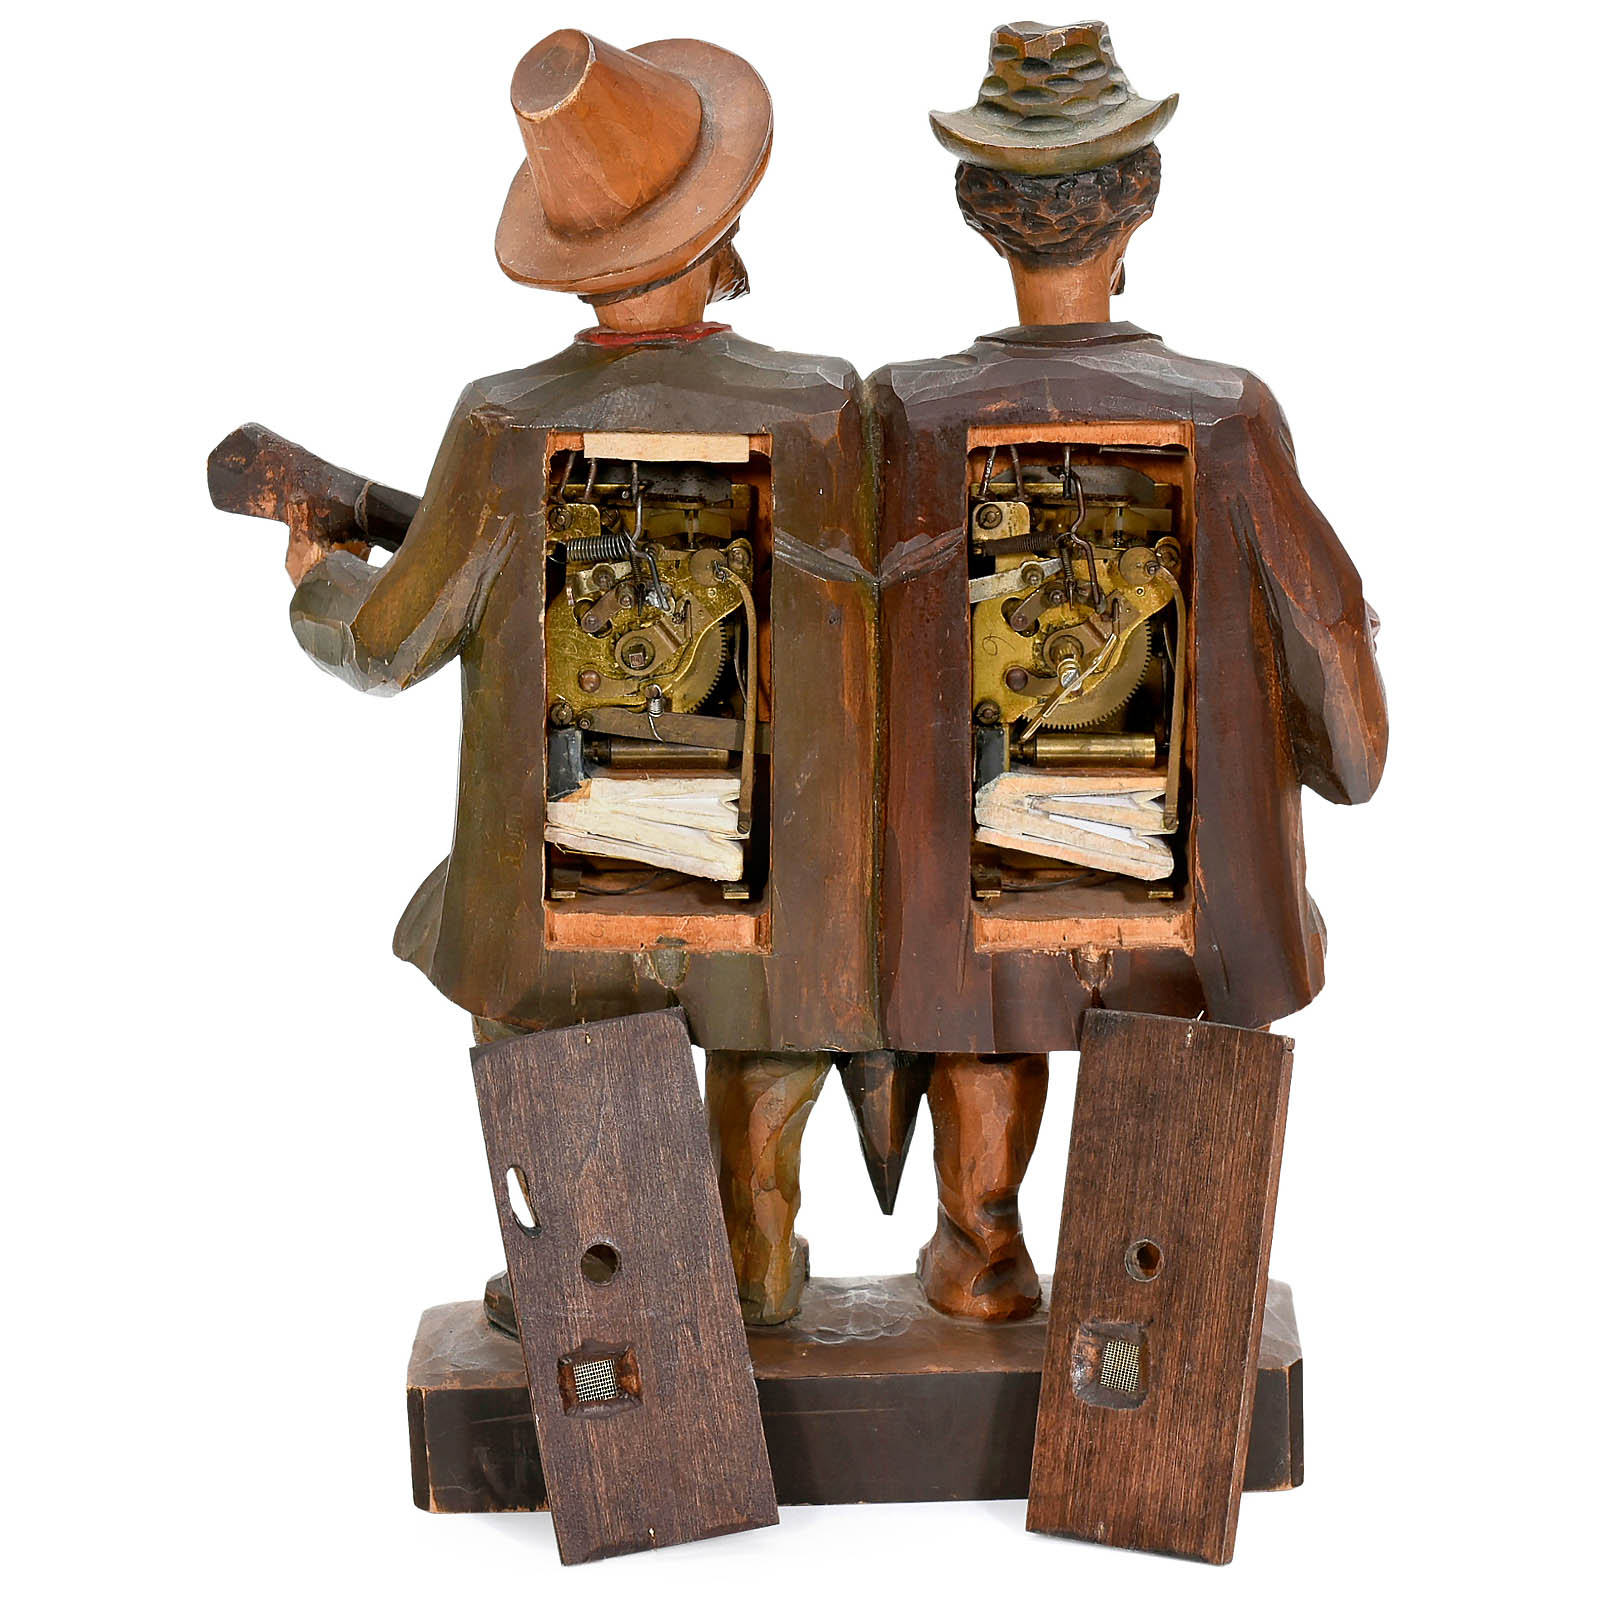 Unusual Double-Whistler Automaton by Karl Griesbaum, c. 1930s
Triberg, carved and painted limewood - Image 2 of 2